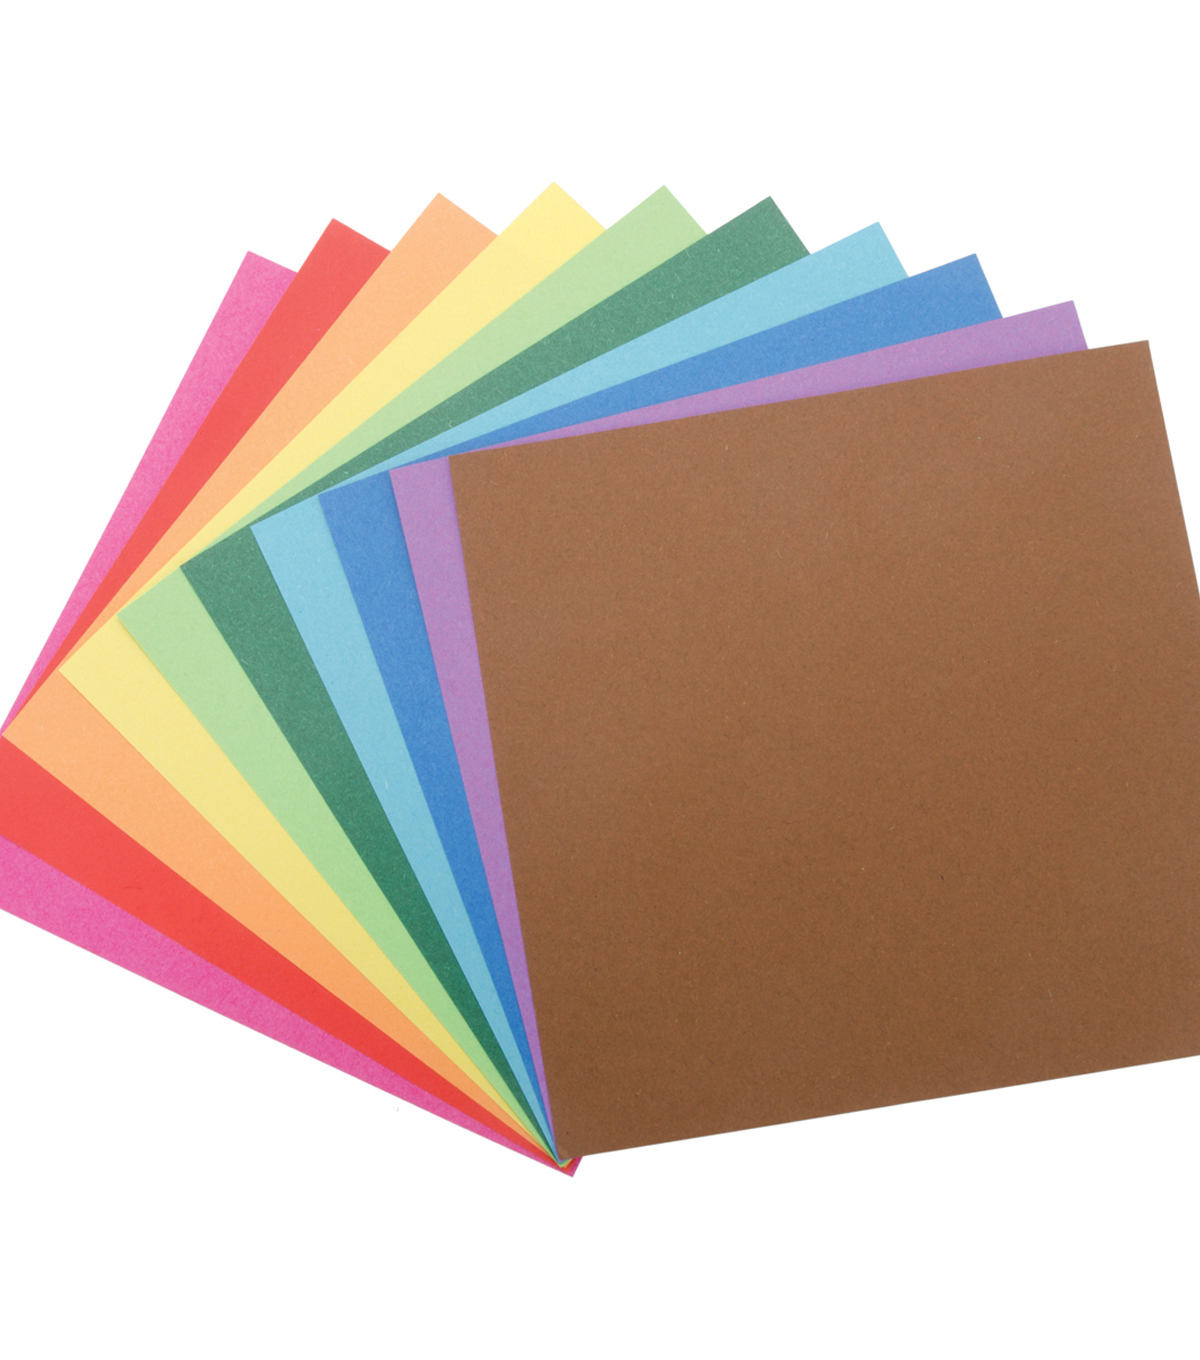 Solid Colored Origami Paper Folia Solid Origami Paper 6x6 500pkg Assorted Colors